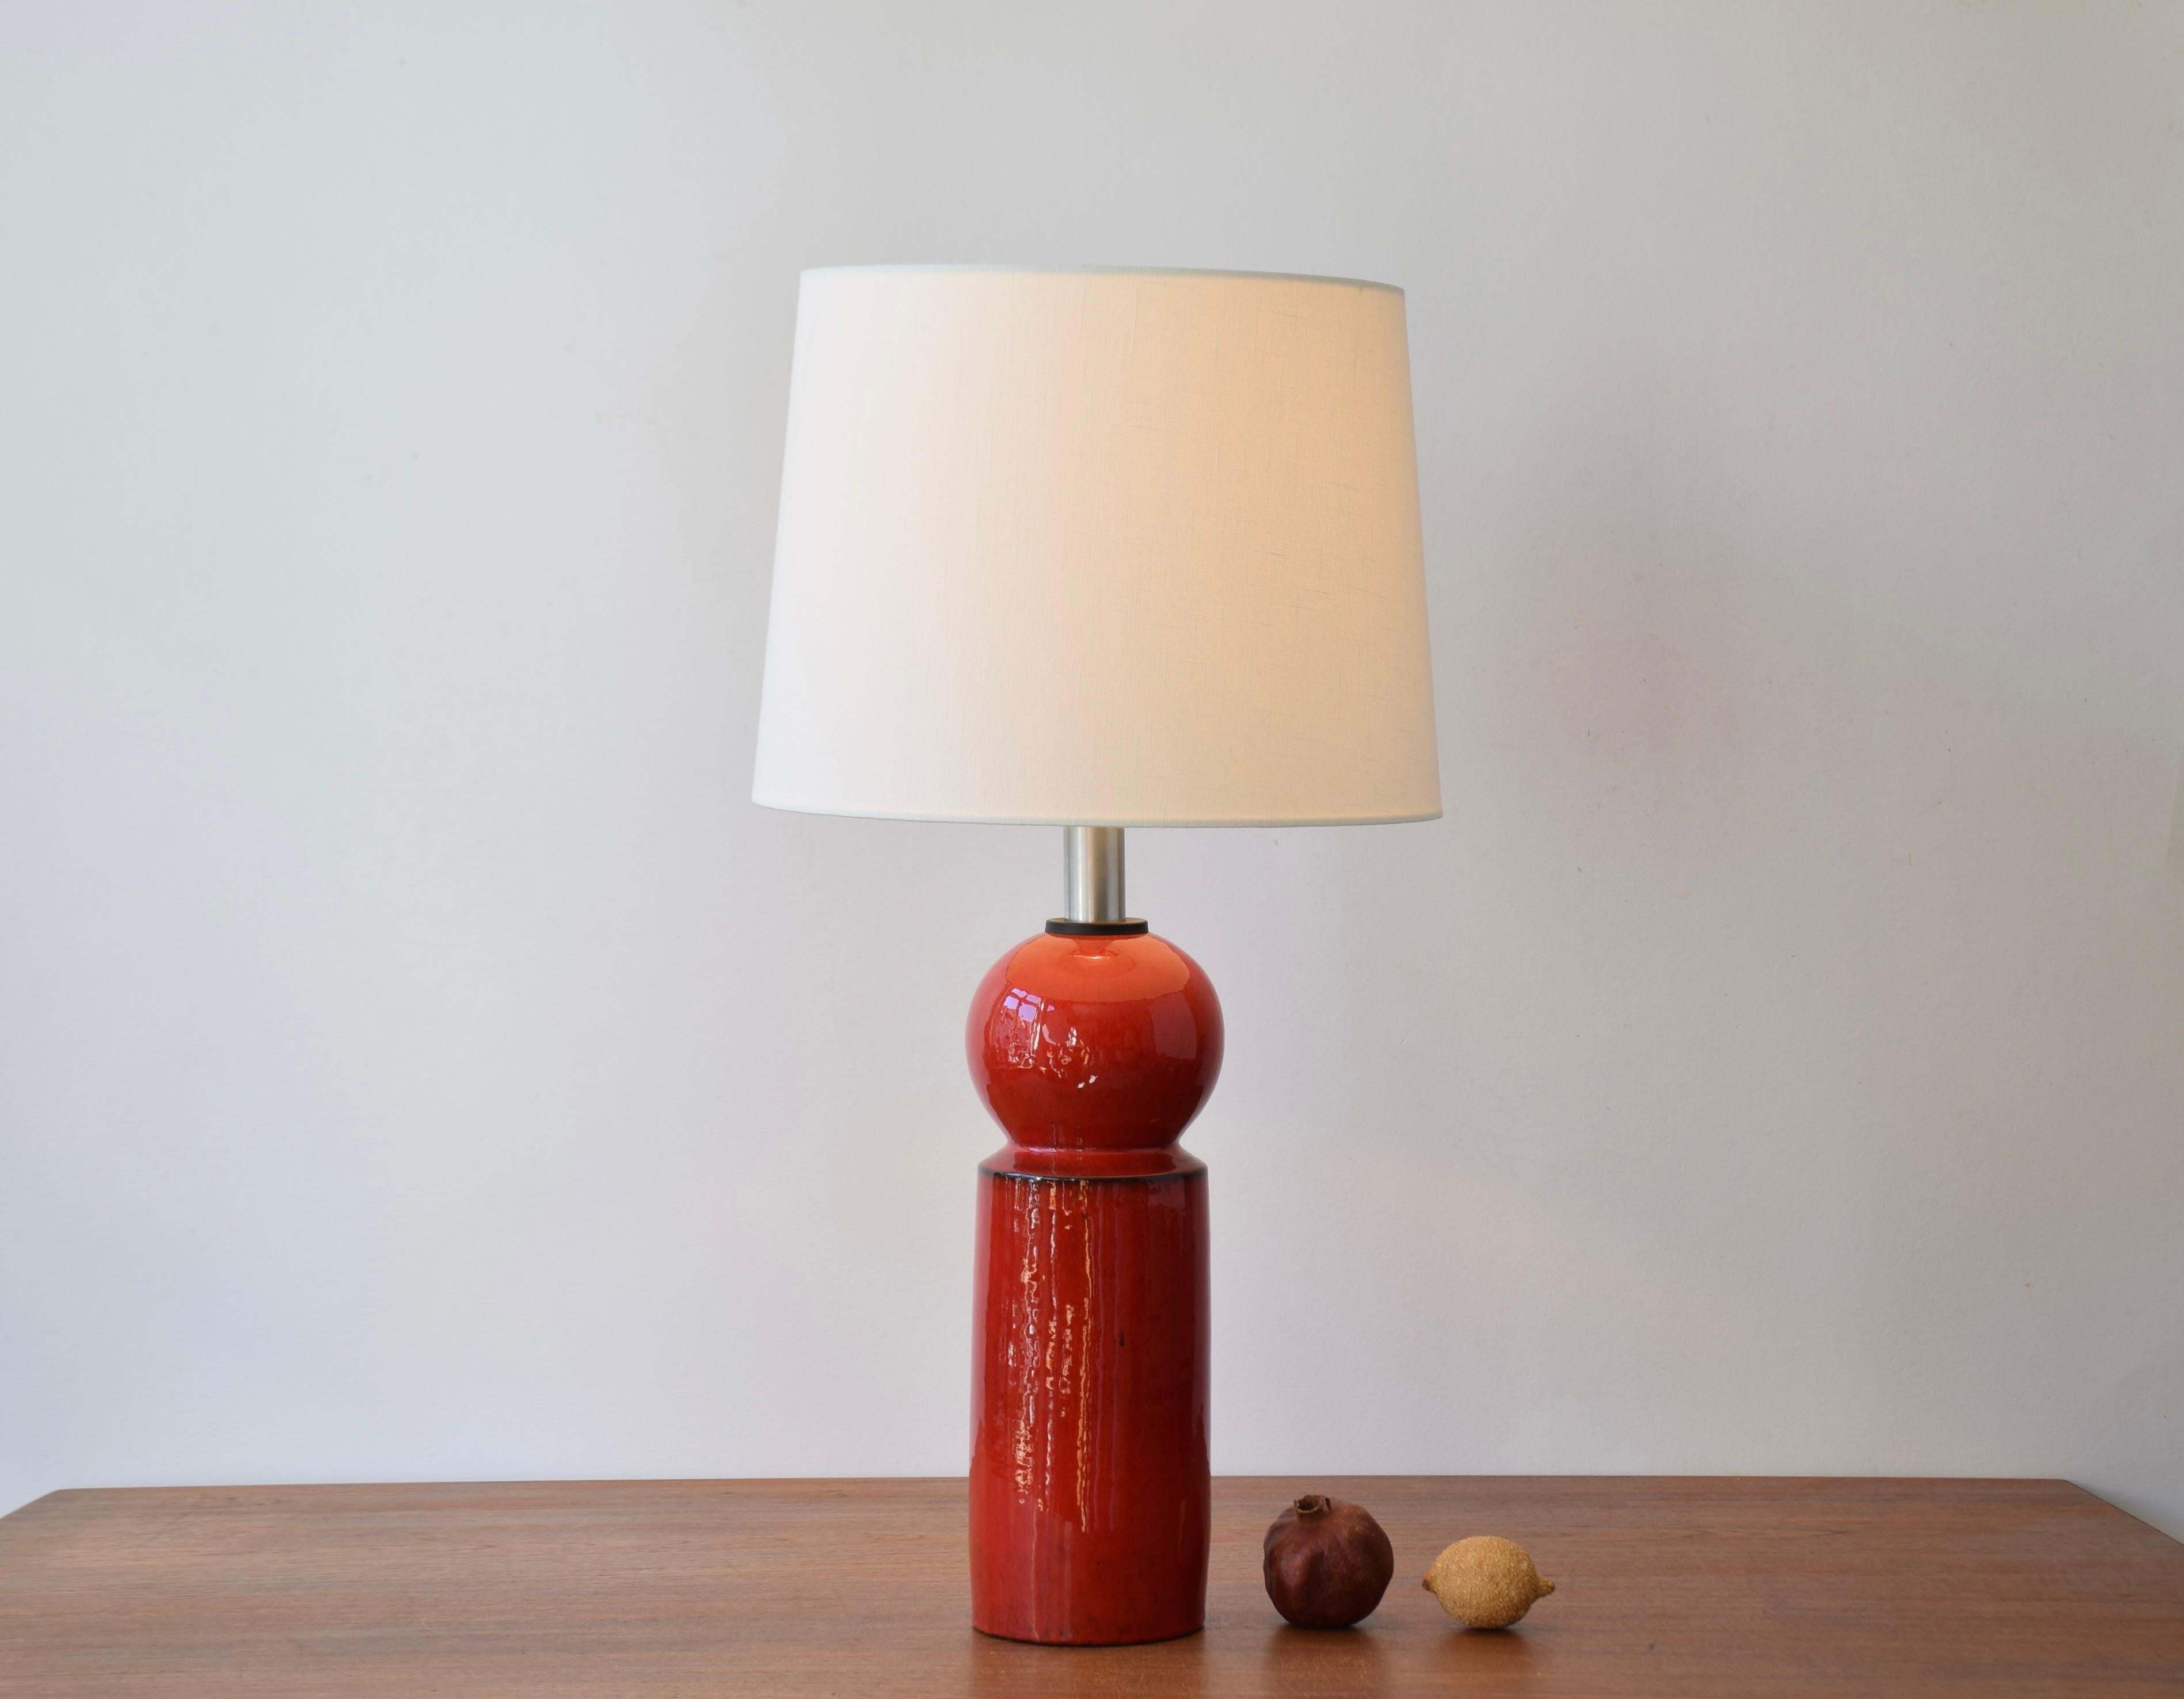 Tall sculptural ceramic table lamp designed by Danish ceramist Allan Schmidt. It's manufactured by Herman A. Kähler´s ceramic workshop in cooperation with Danish lamp manufacturer LYFA ca 1960s. 

It is decorated with a shiny red glaze with darker